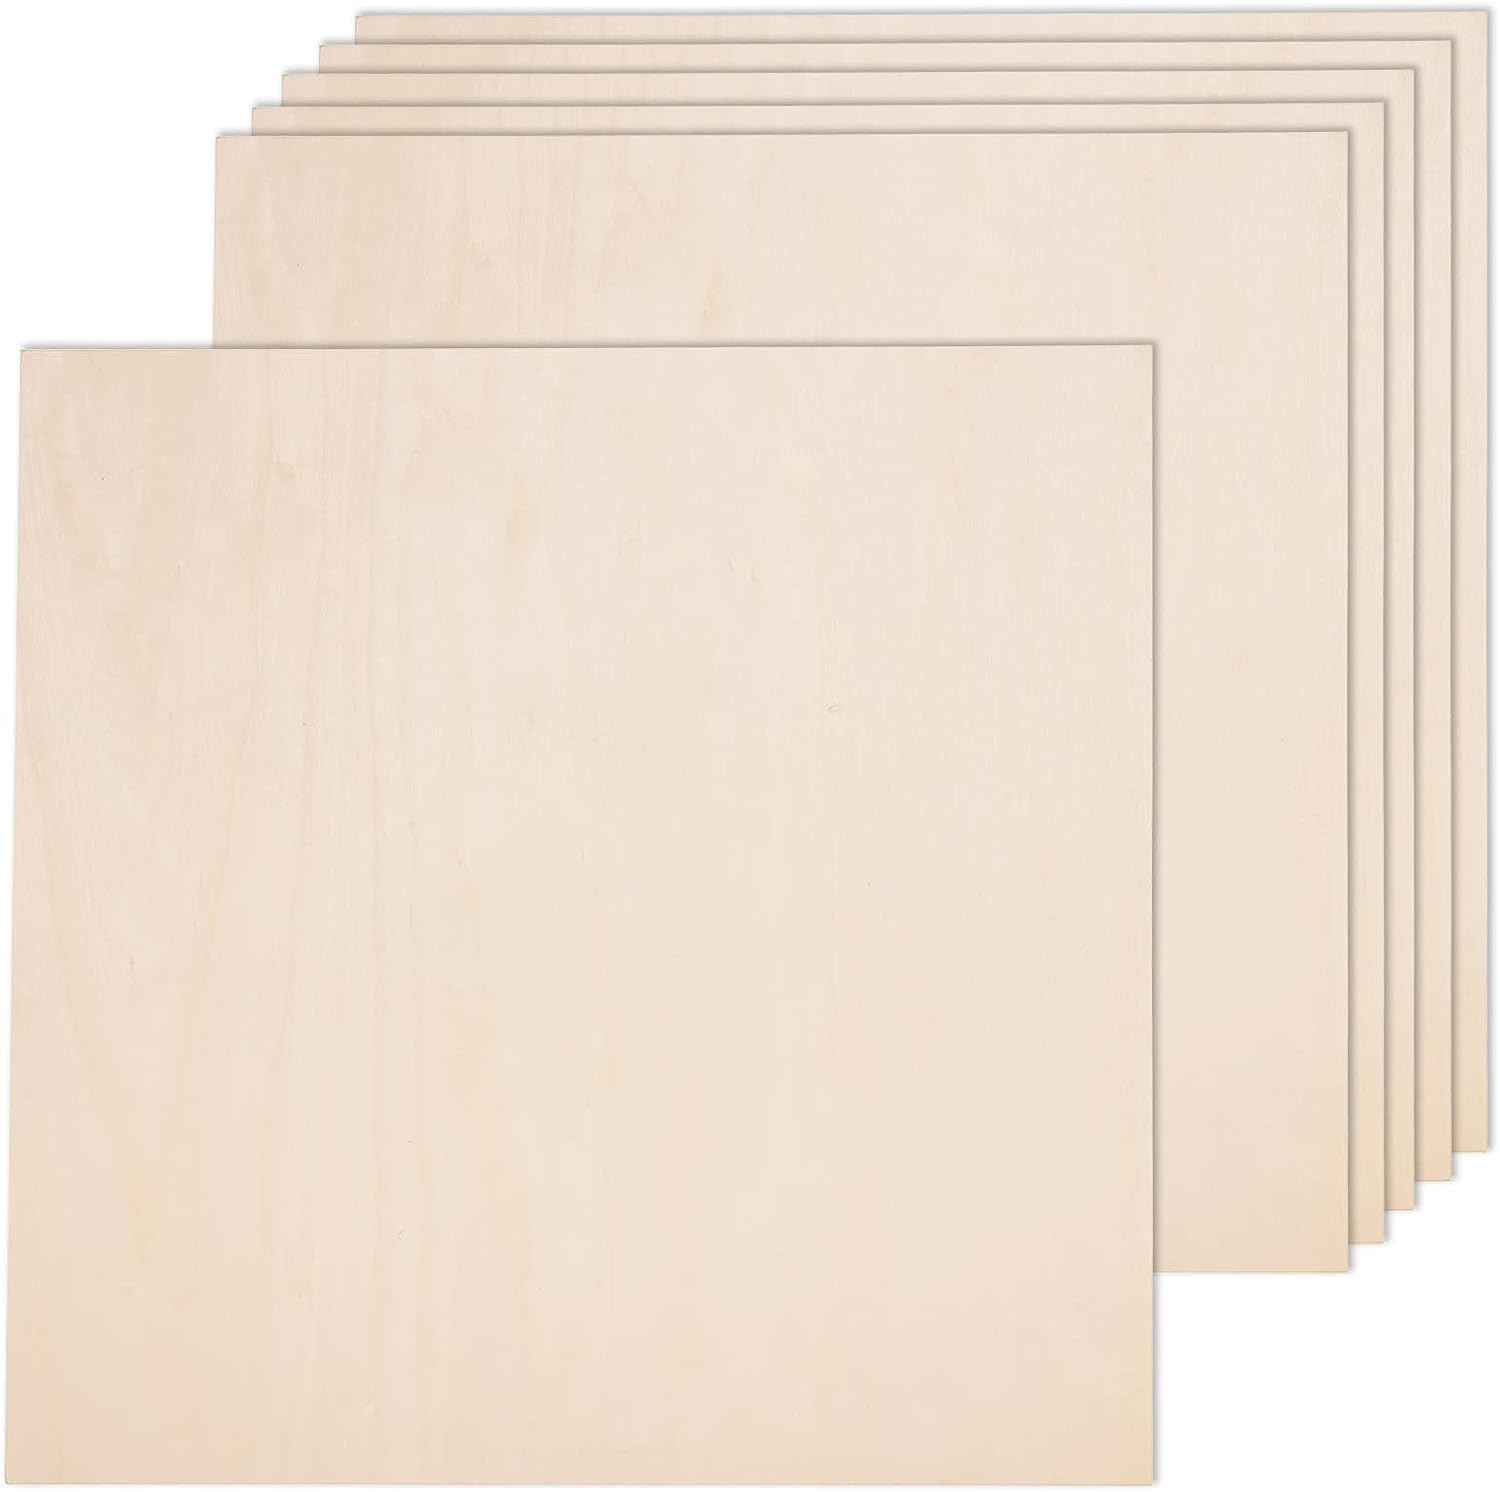 12 X 12 Inch - 3Mm Basswood Sheets Plywood Sheets, 8Pcs Square Unfinished  Wood Board for DIY Crafts, Laser Cutting 